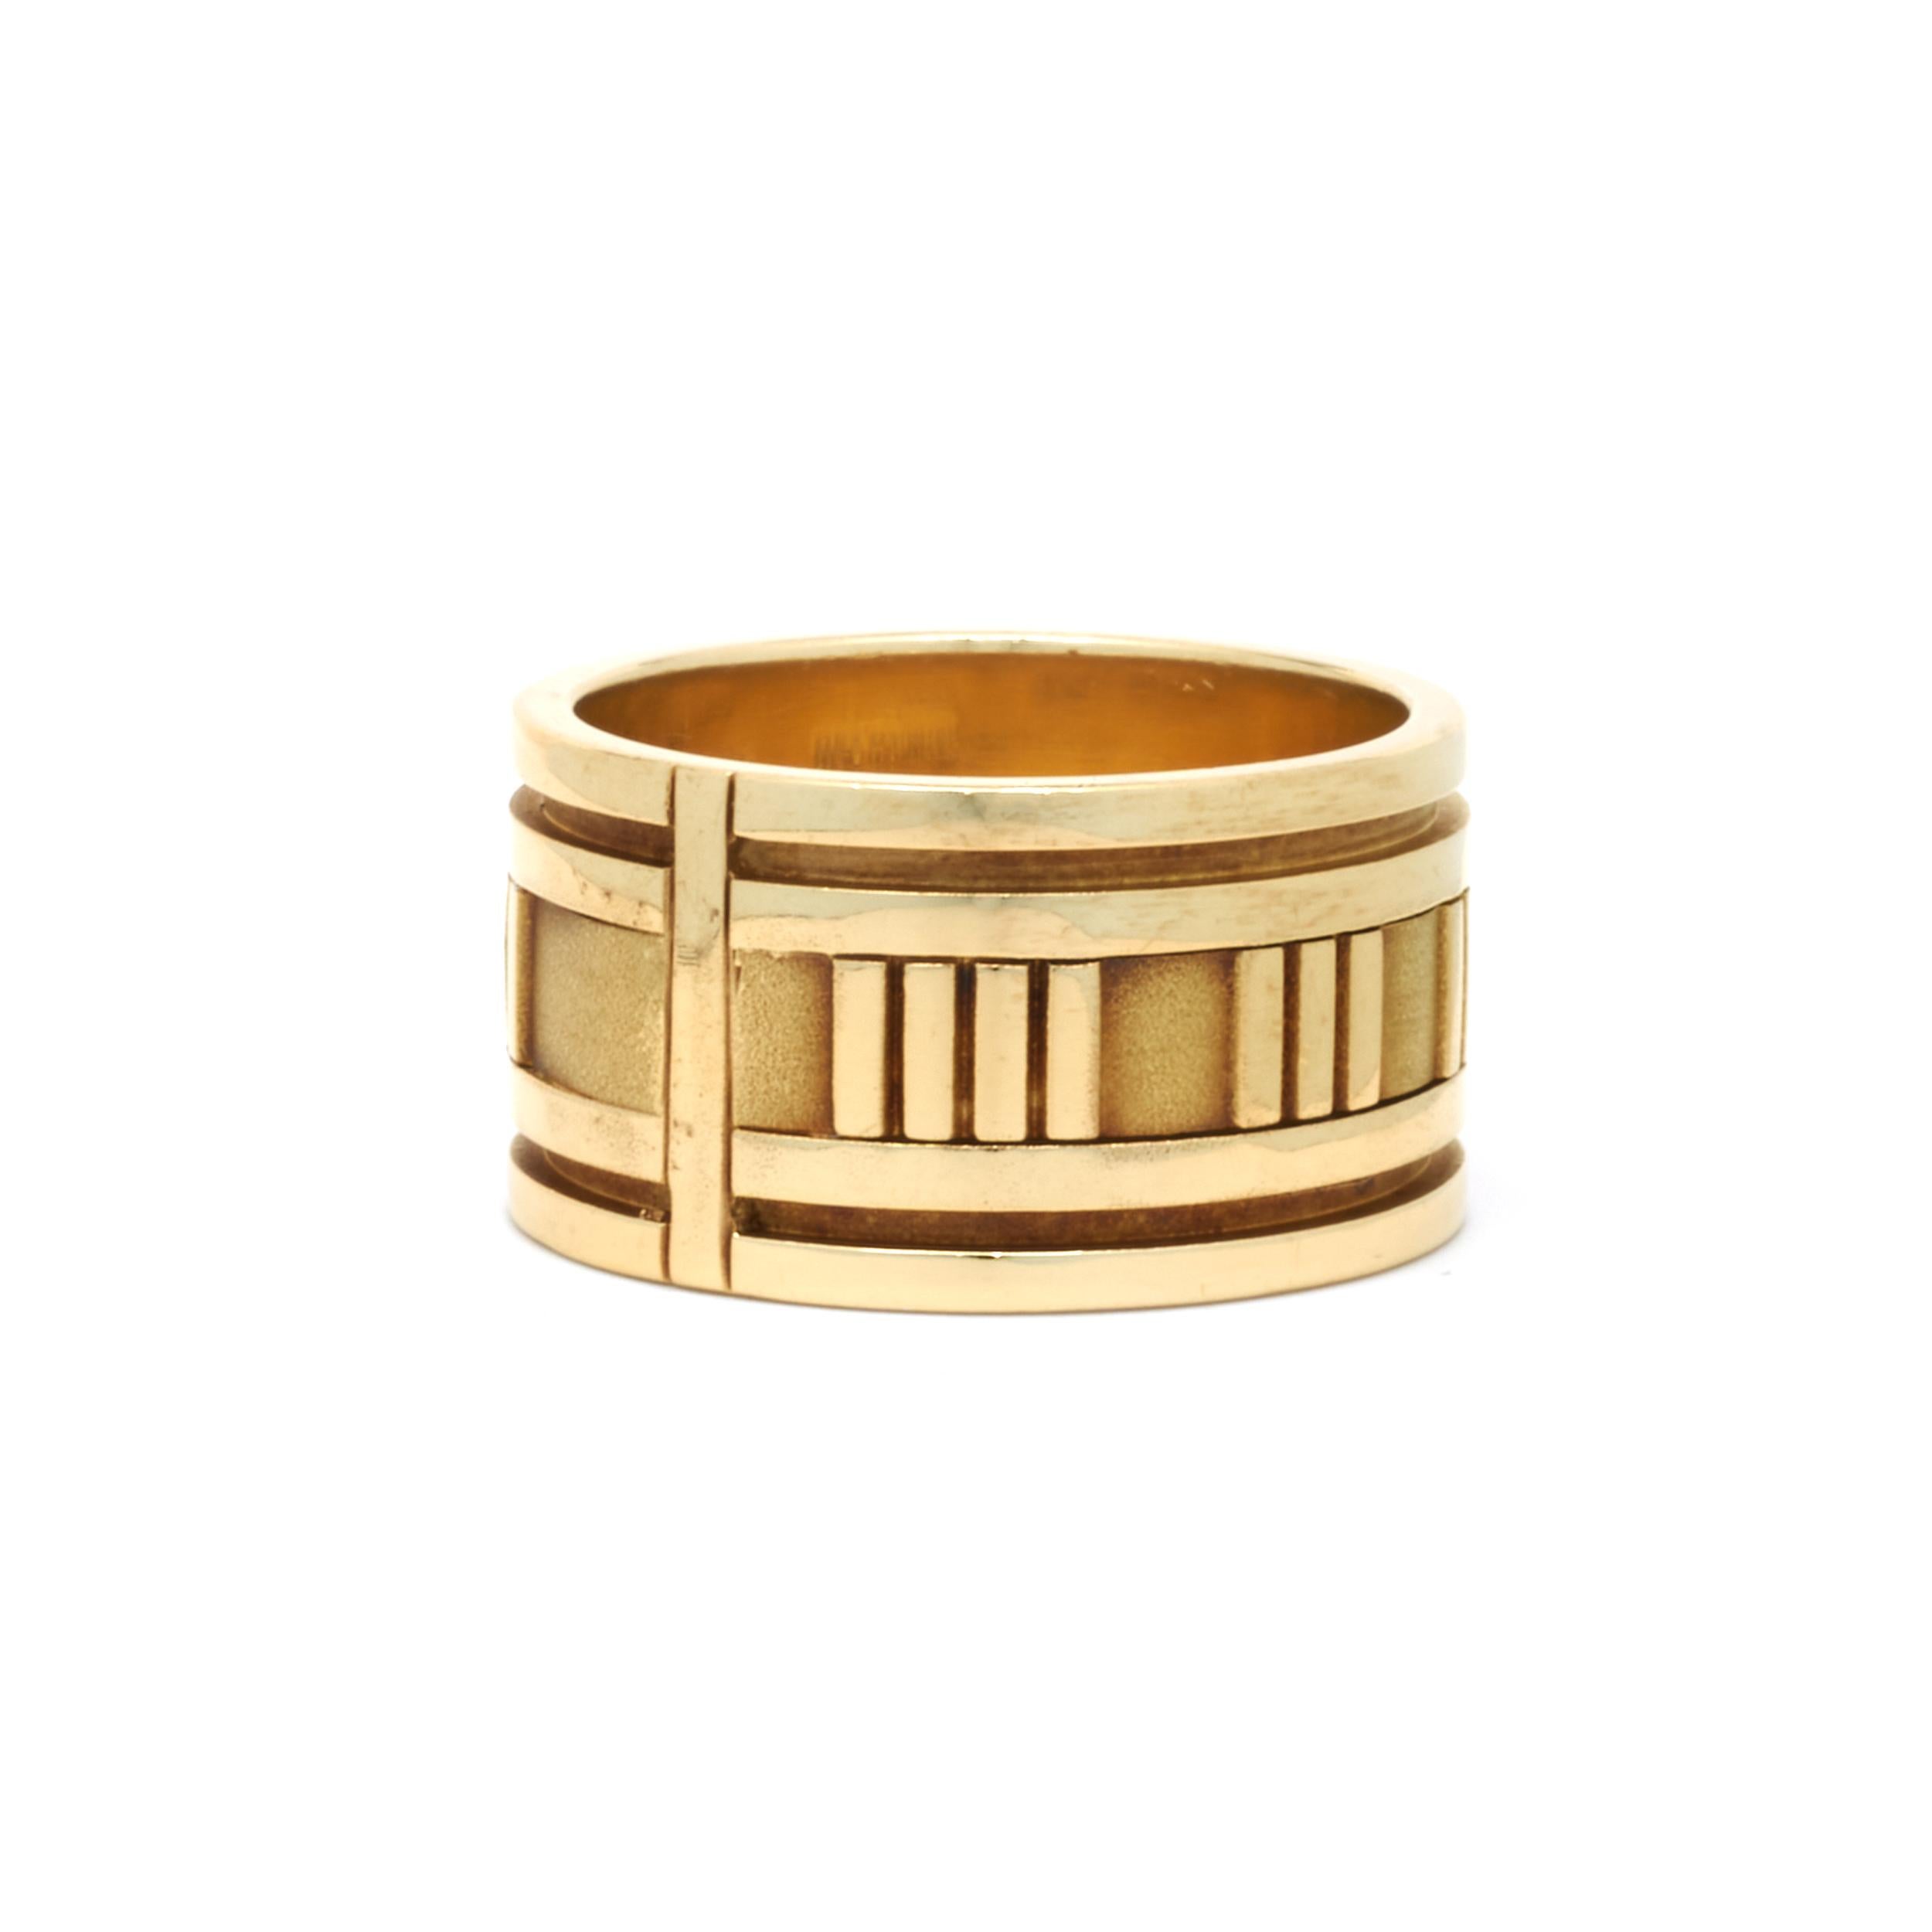 Designer: Tiffany & Co. 
Material: 18K yellow gold
Dimensions: band measures 12mm
Size 9
Weight: 16.36 grams
